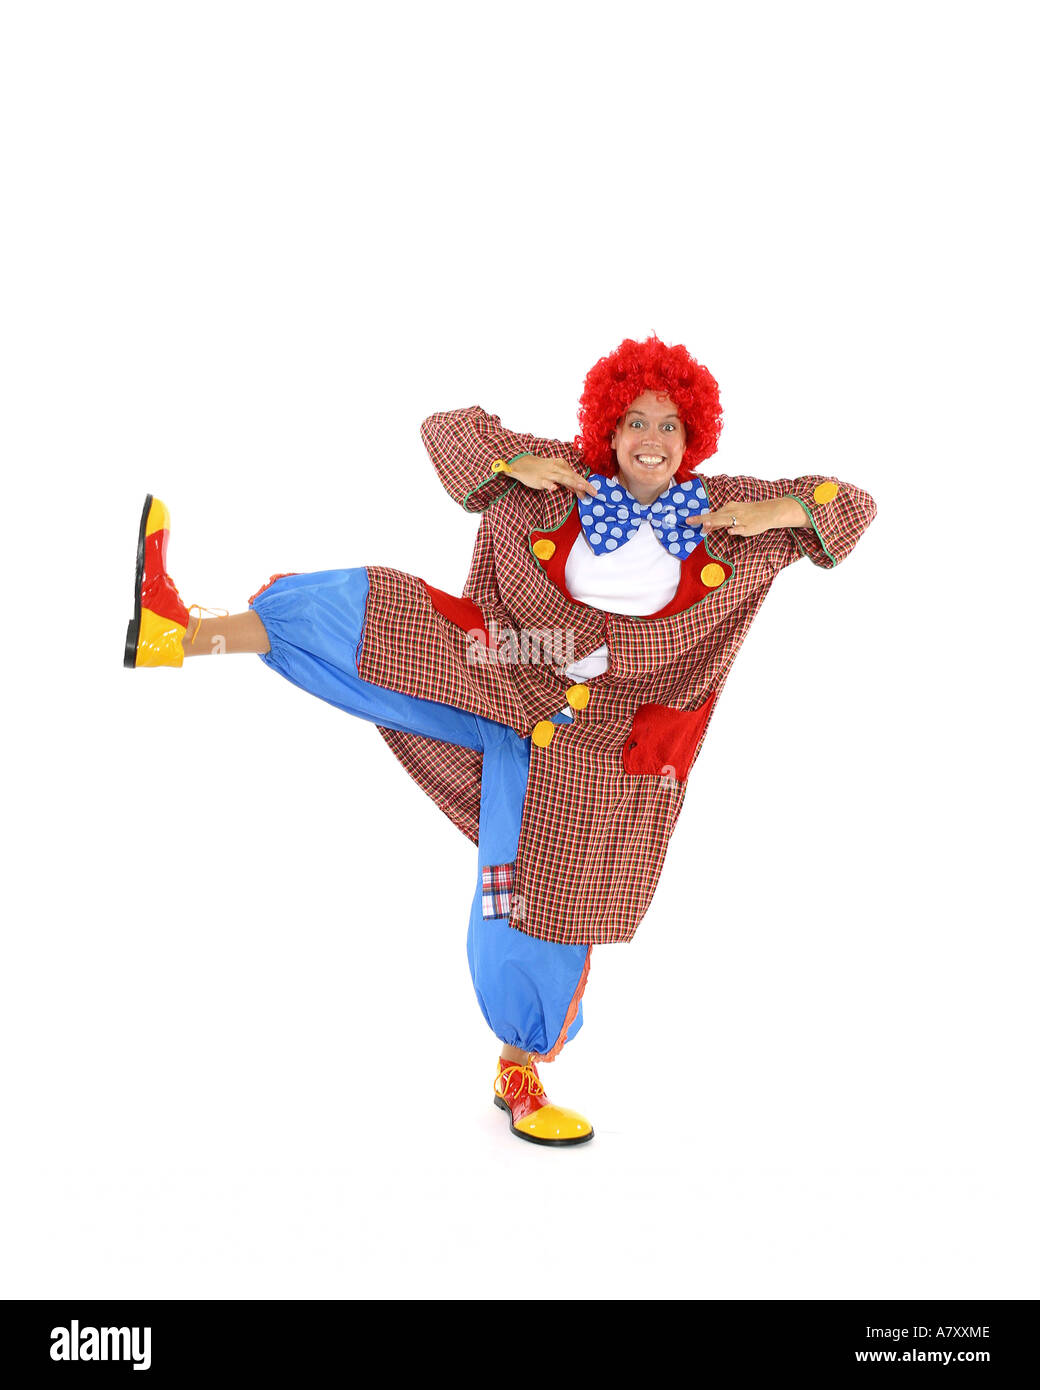 clown cutout white background studio kick success funny stupid colorful red blue yellow fancy dress smile laugh bow tie dancing Stock Photo